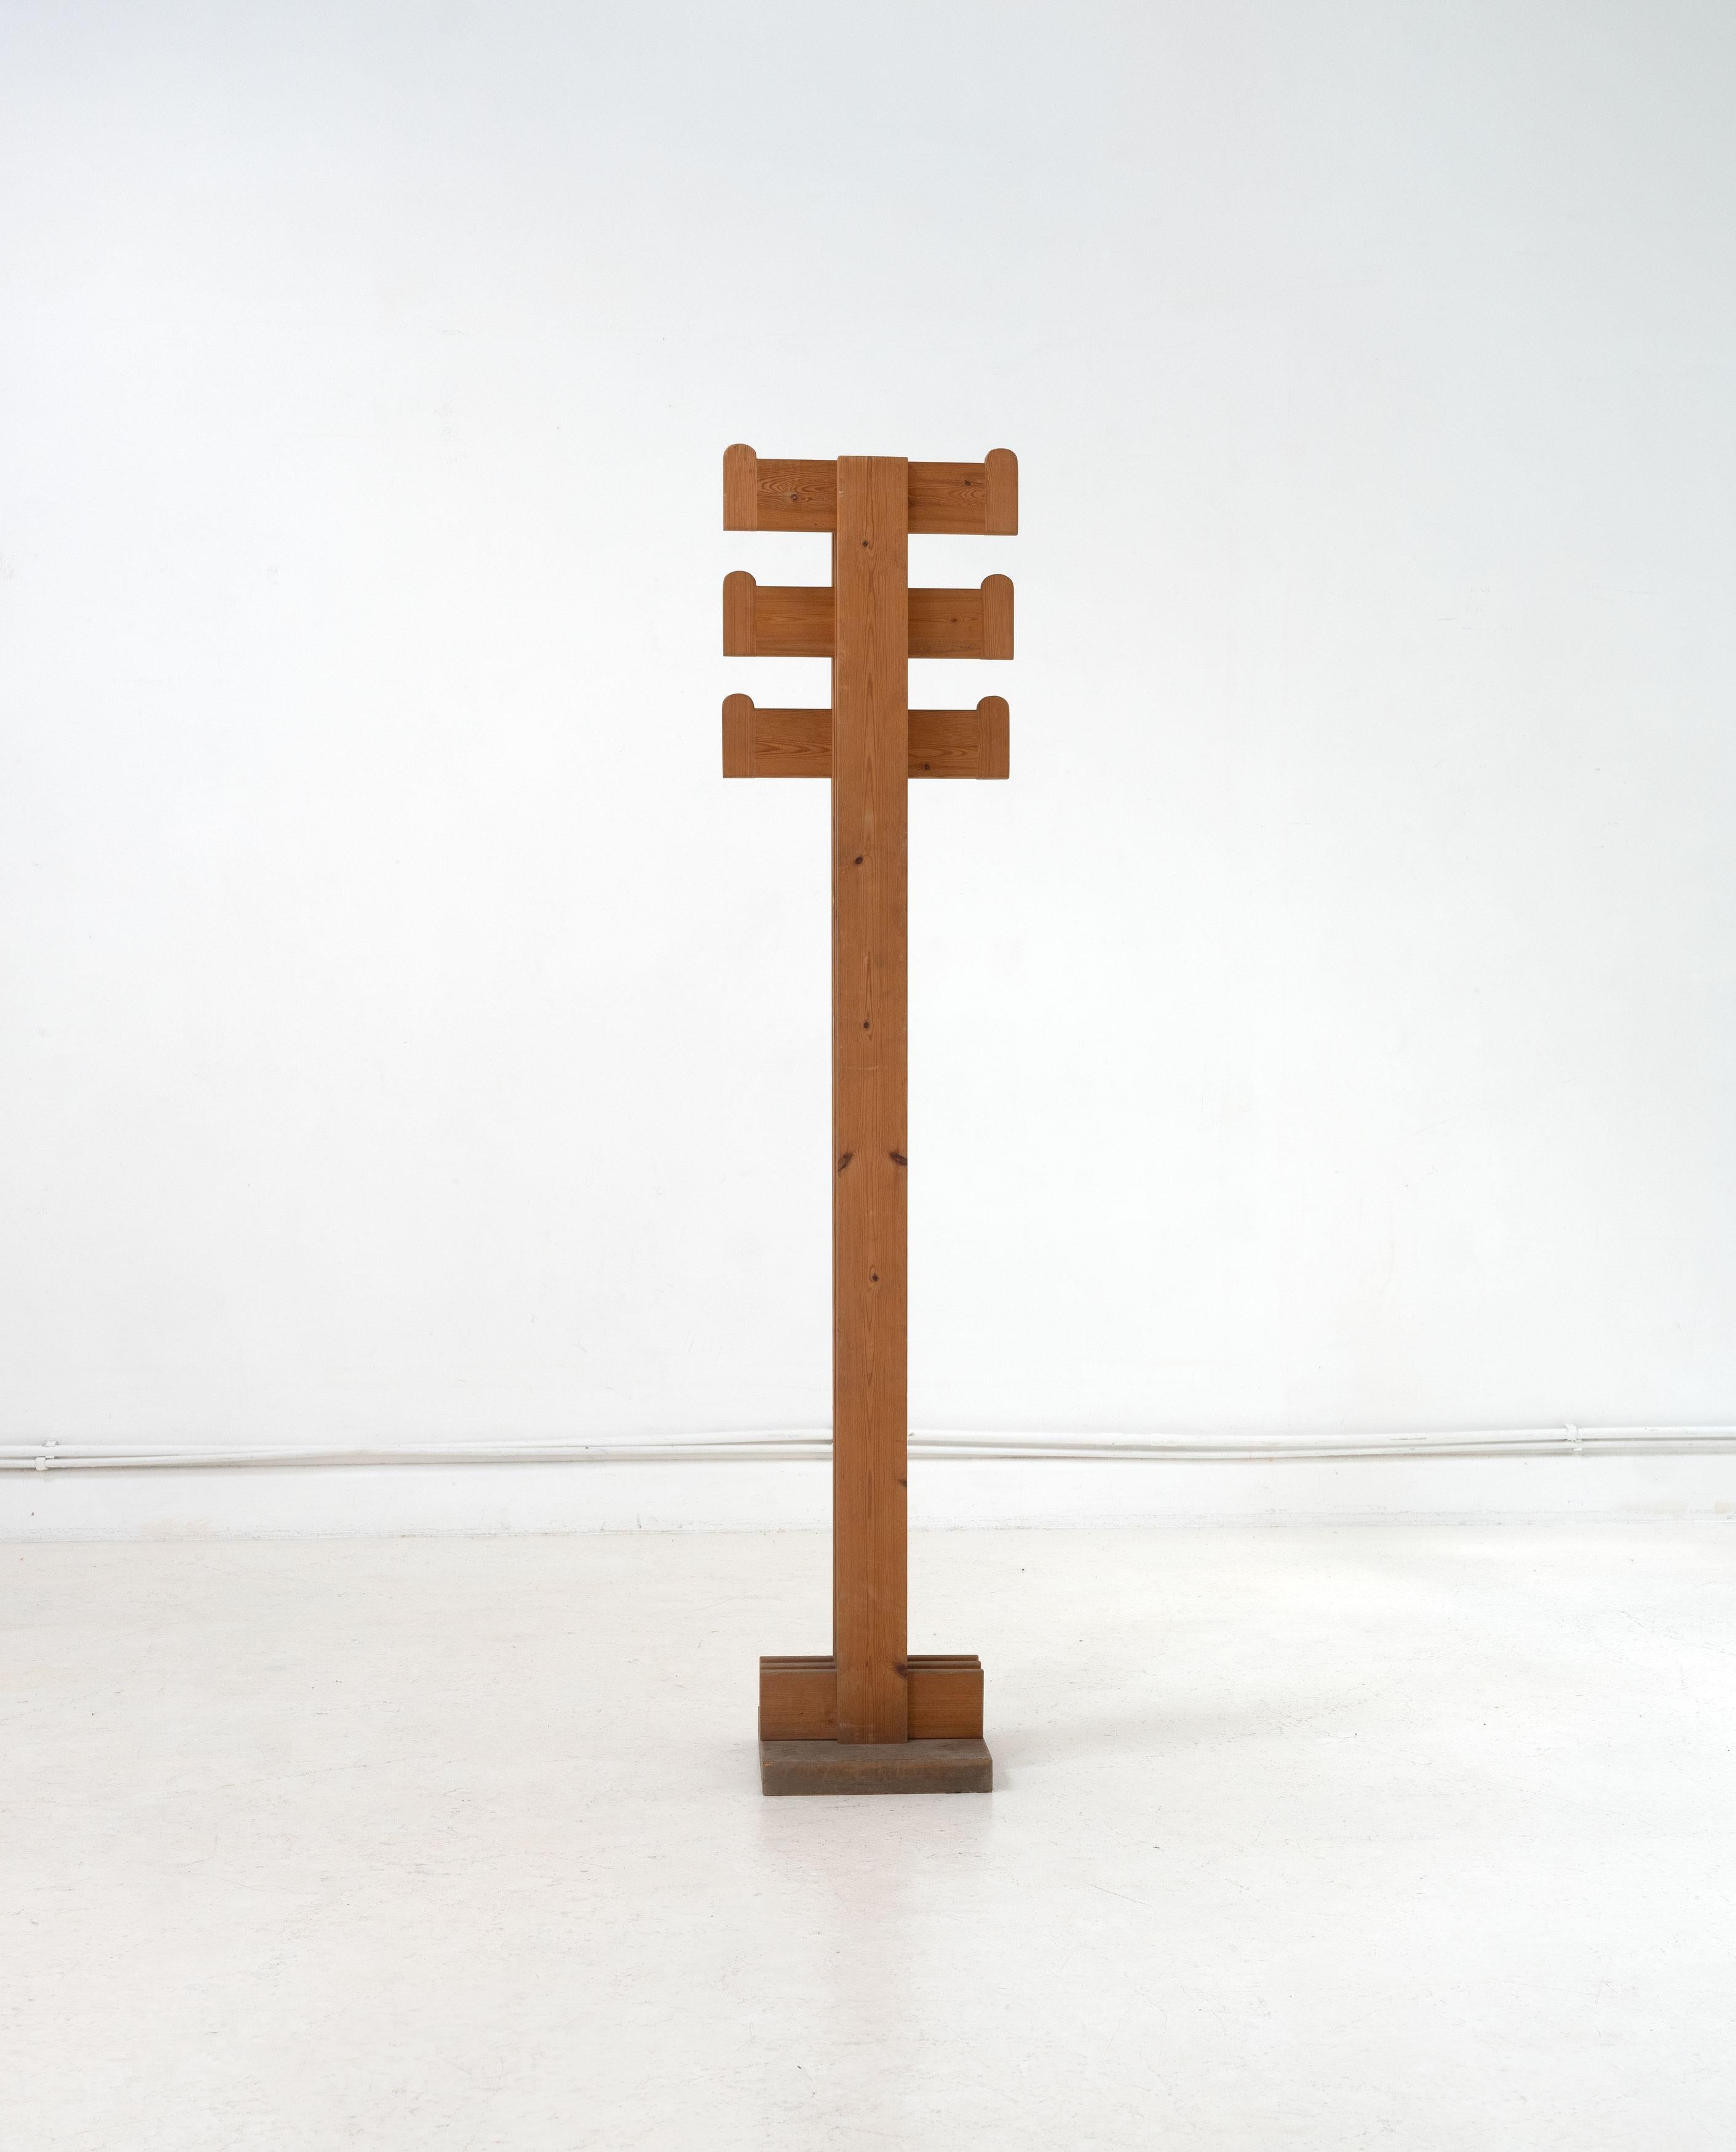 Pine coat rack attributed to Marco Ceroli, Italy, c.1970.

Mario Ceroli (1938) is one of the most influential artists of the Italian post-war period. Ceroli graduated from 'Accademia delle Belle Arti' in Rome, where he studied with Leoncillo,